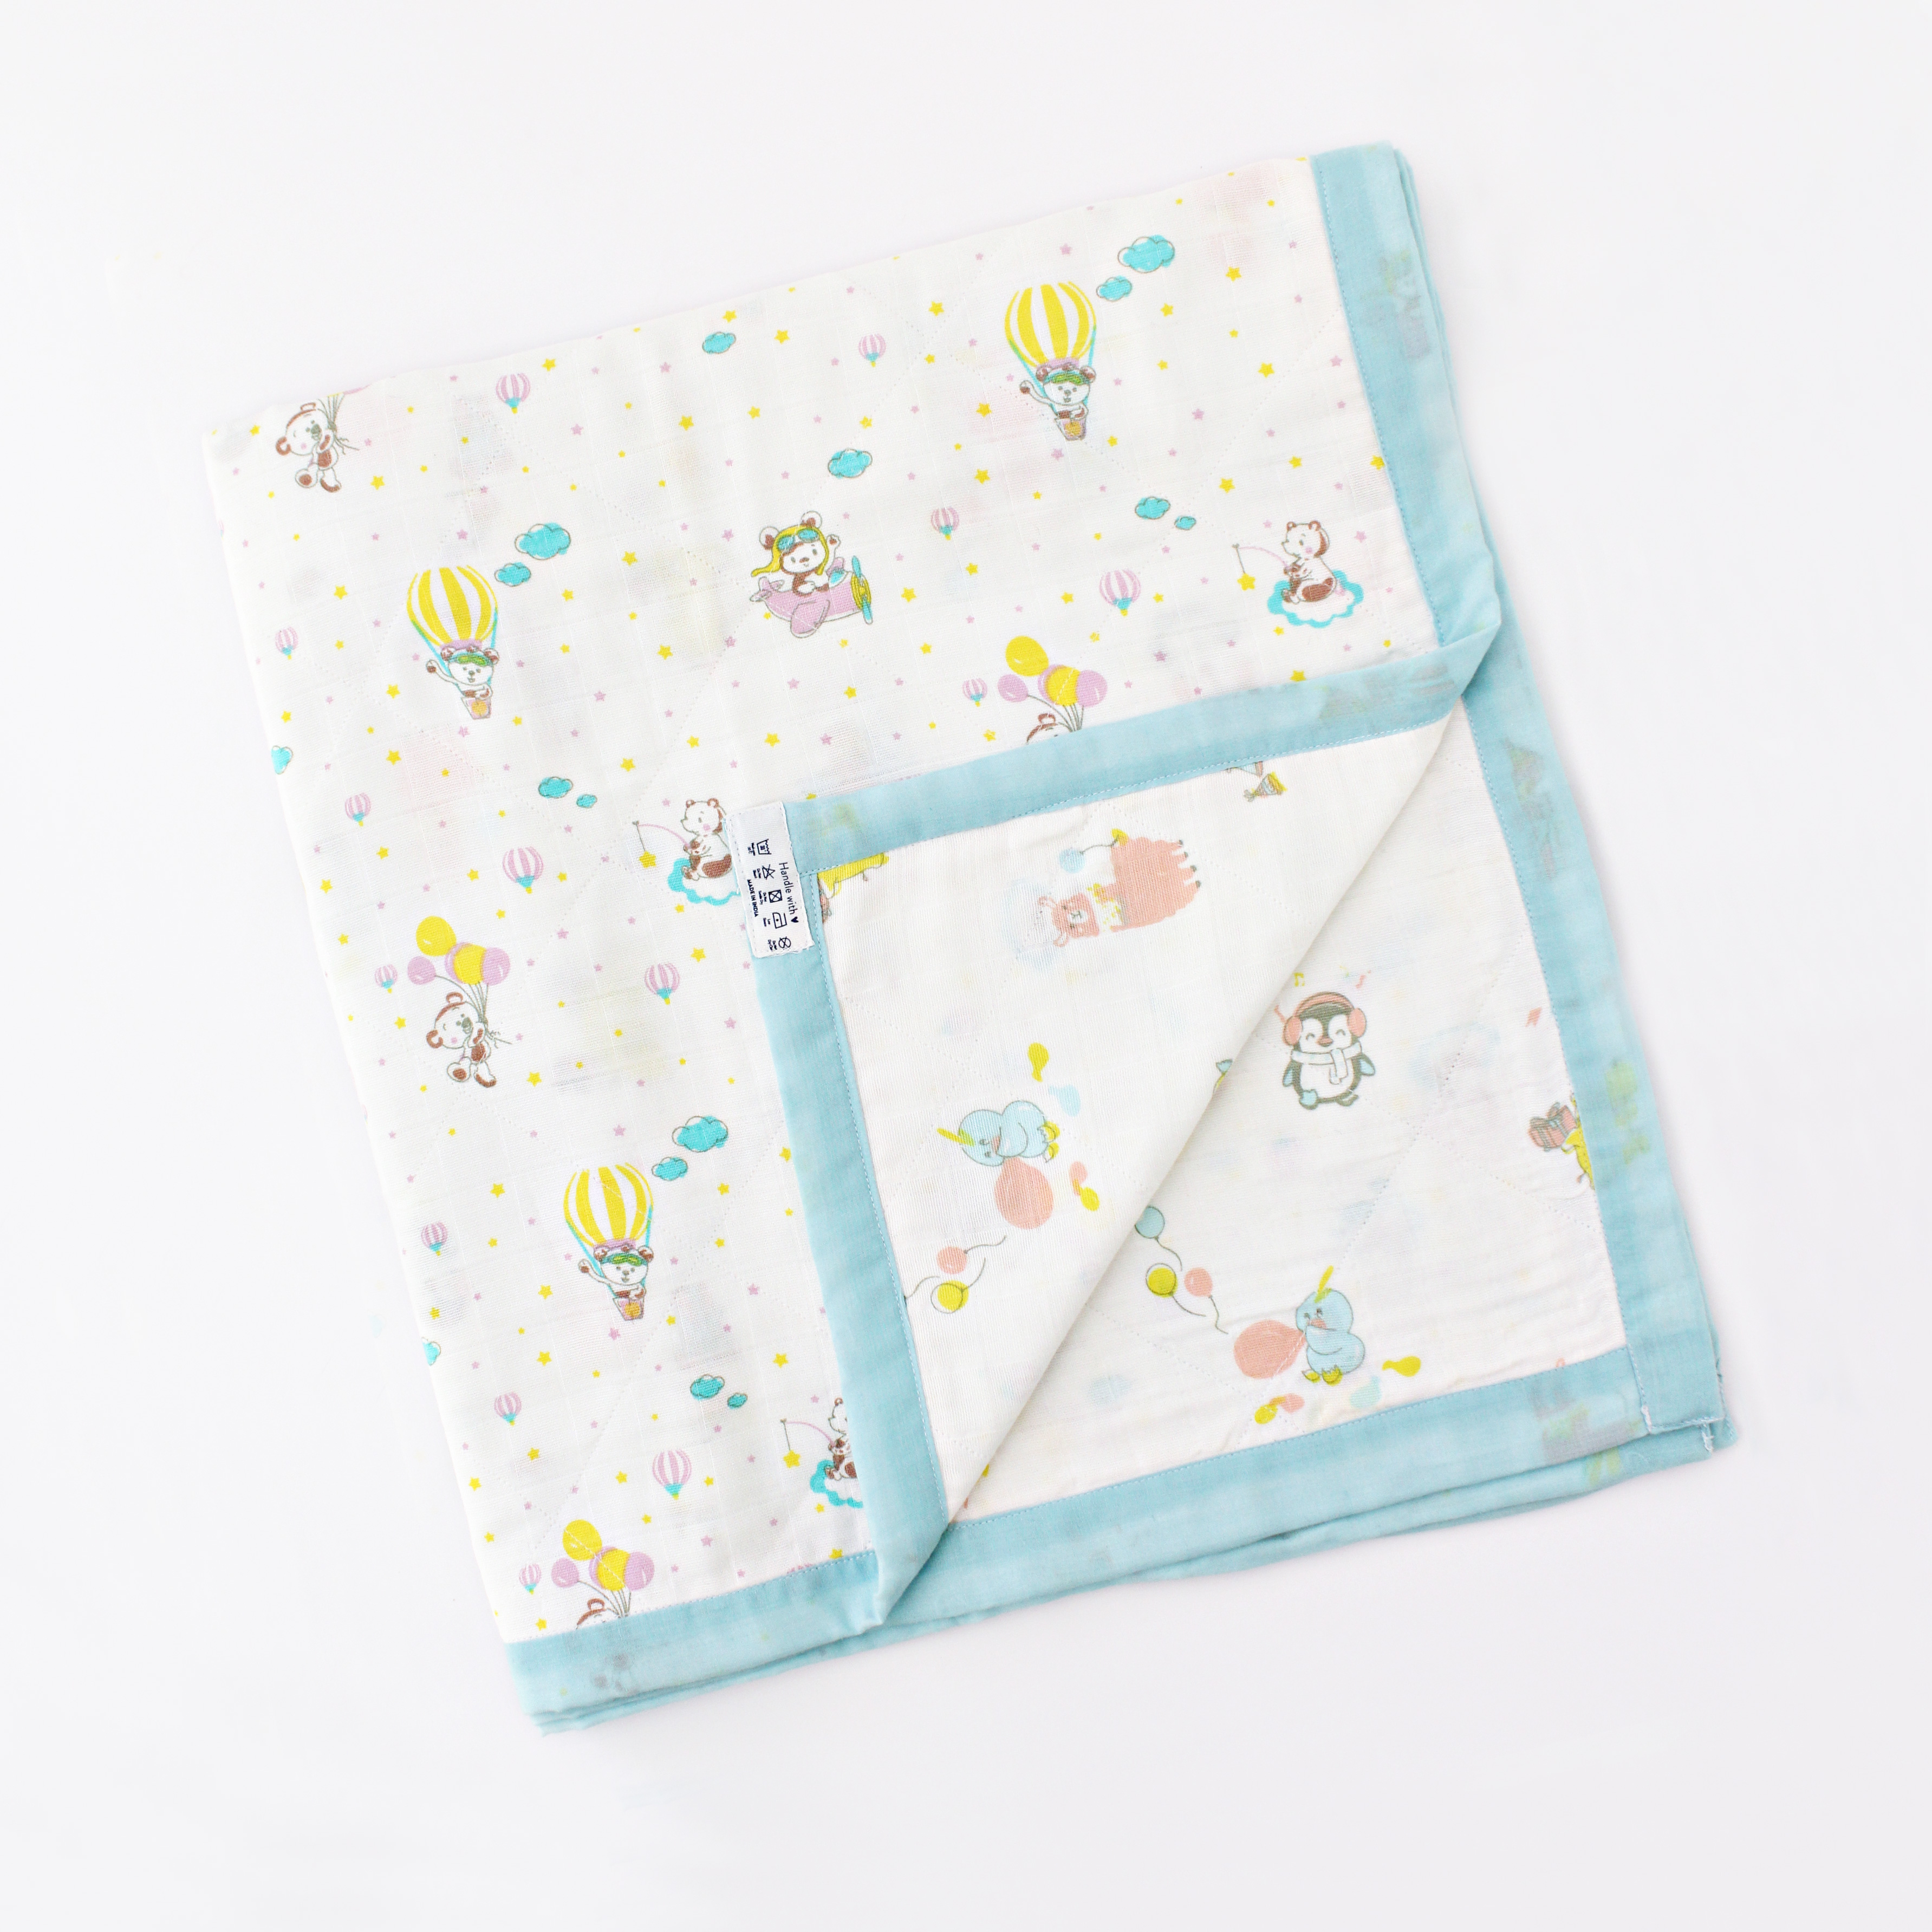 Teddy up above the sky & Let's Celebrate - Reversible Blanket - 4 layered